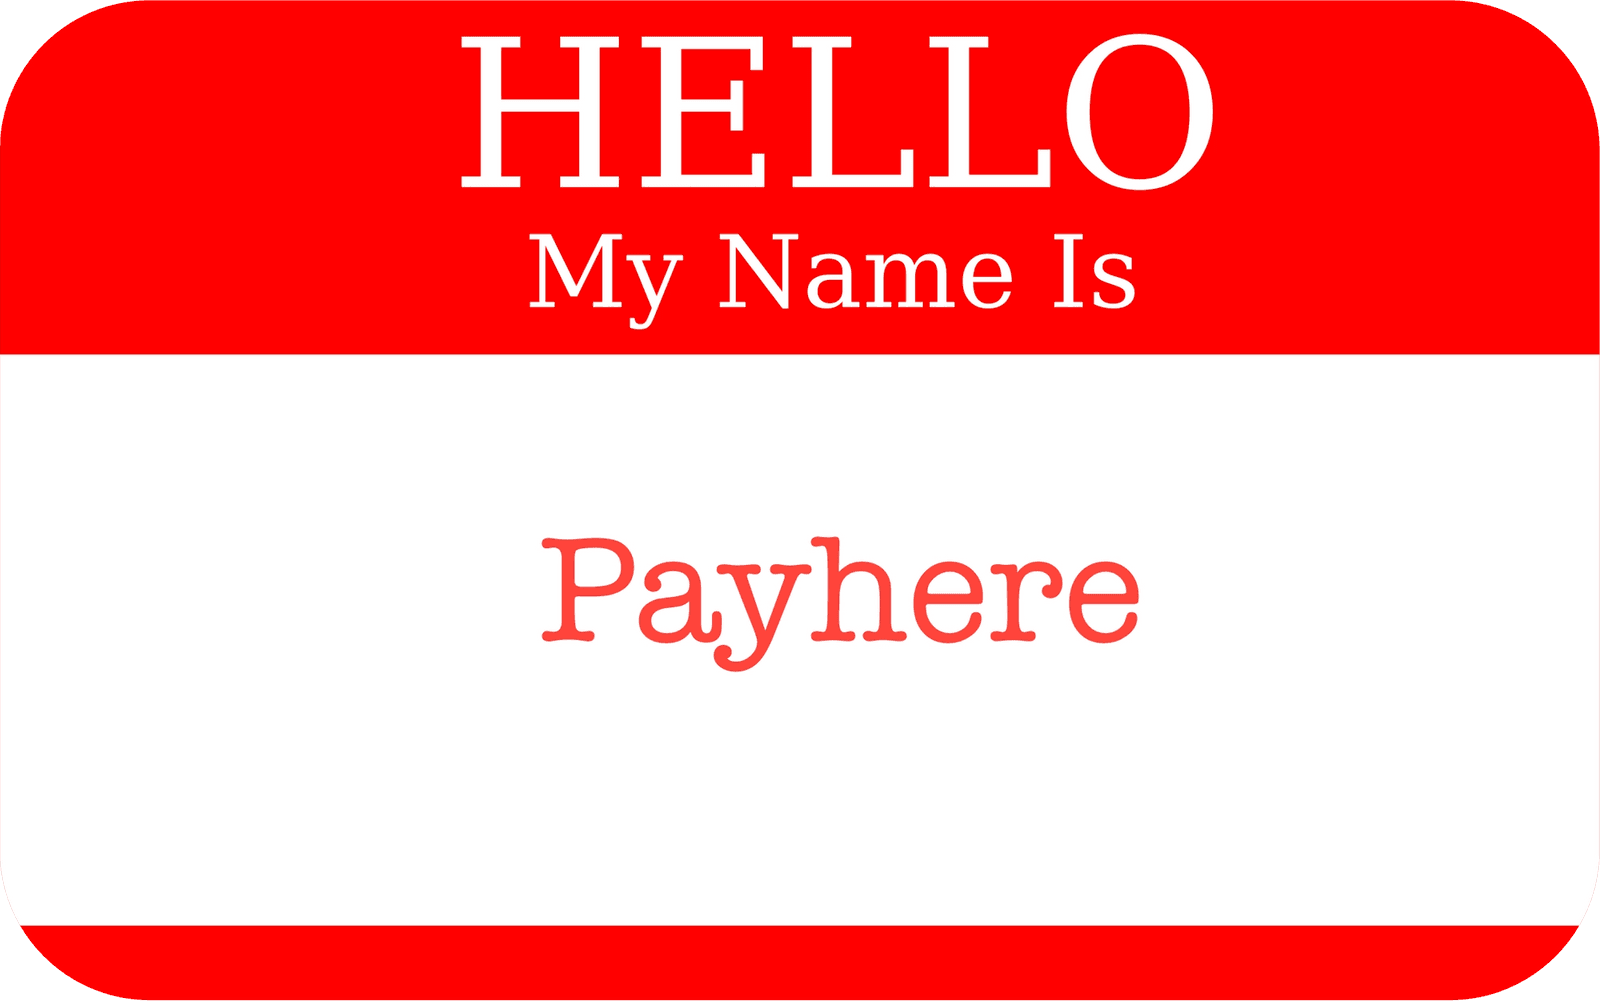 Who/What/Why Payhere?